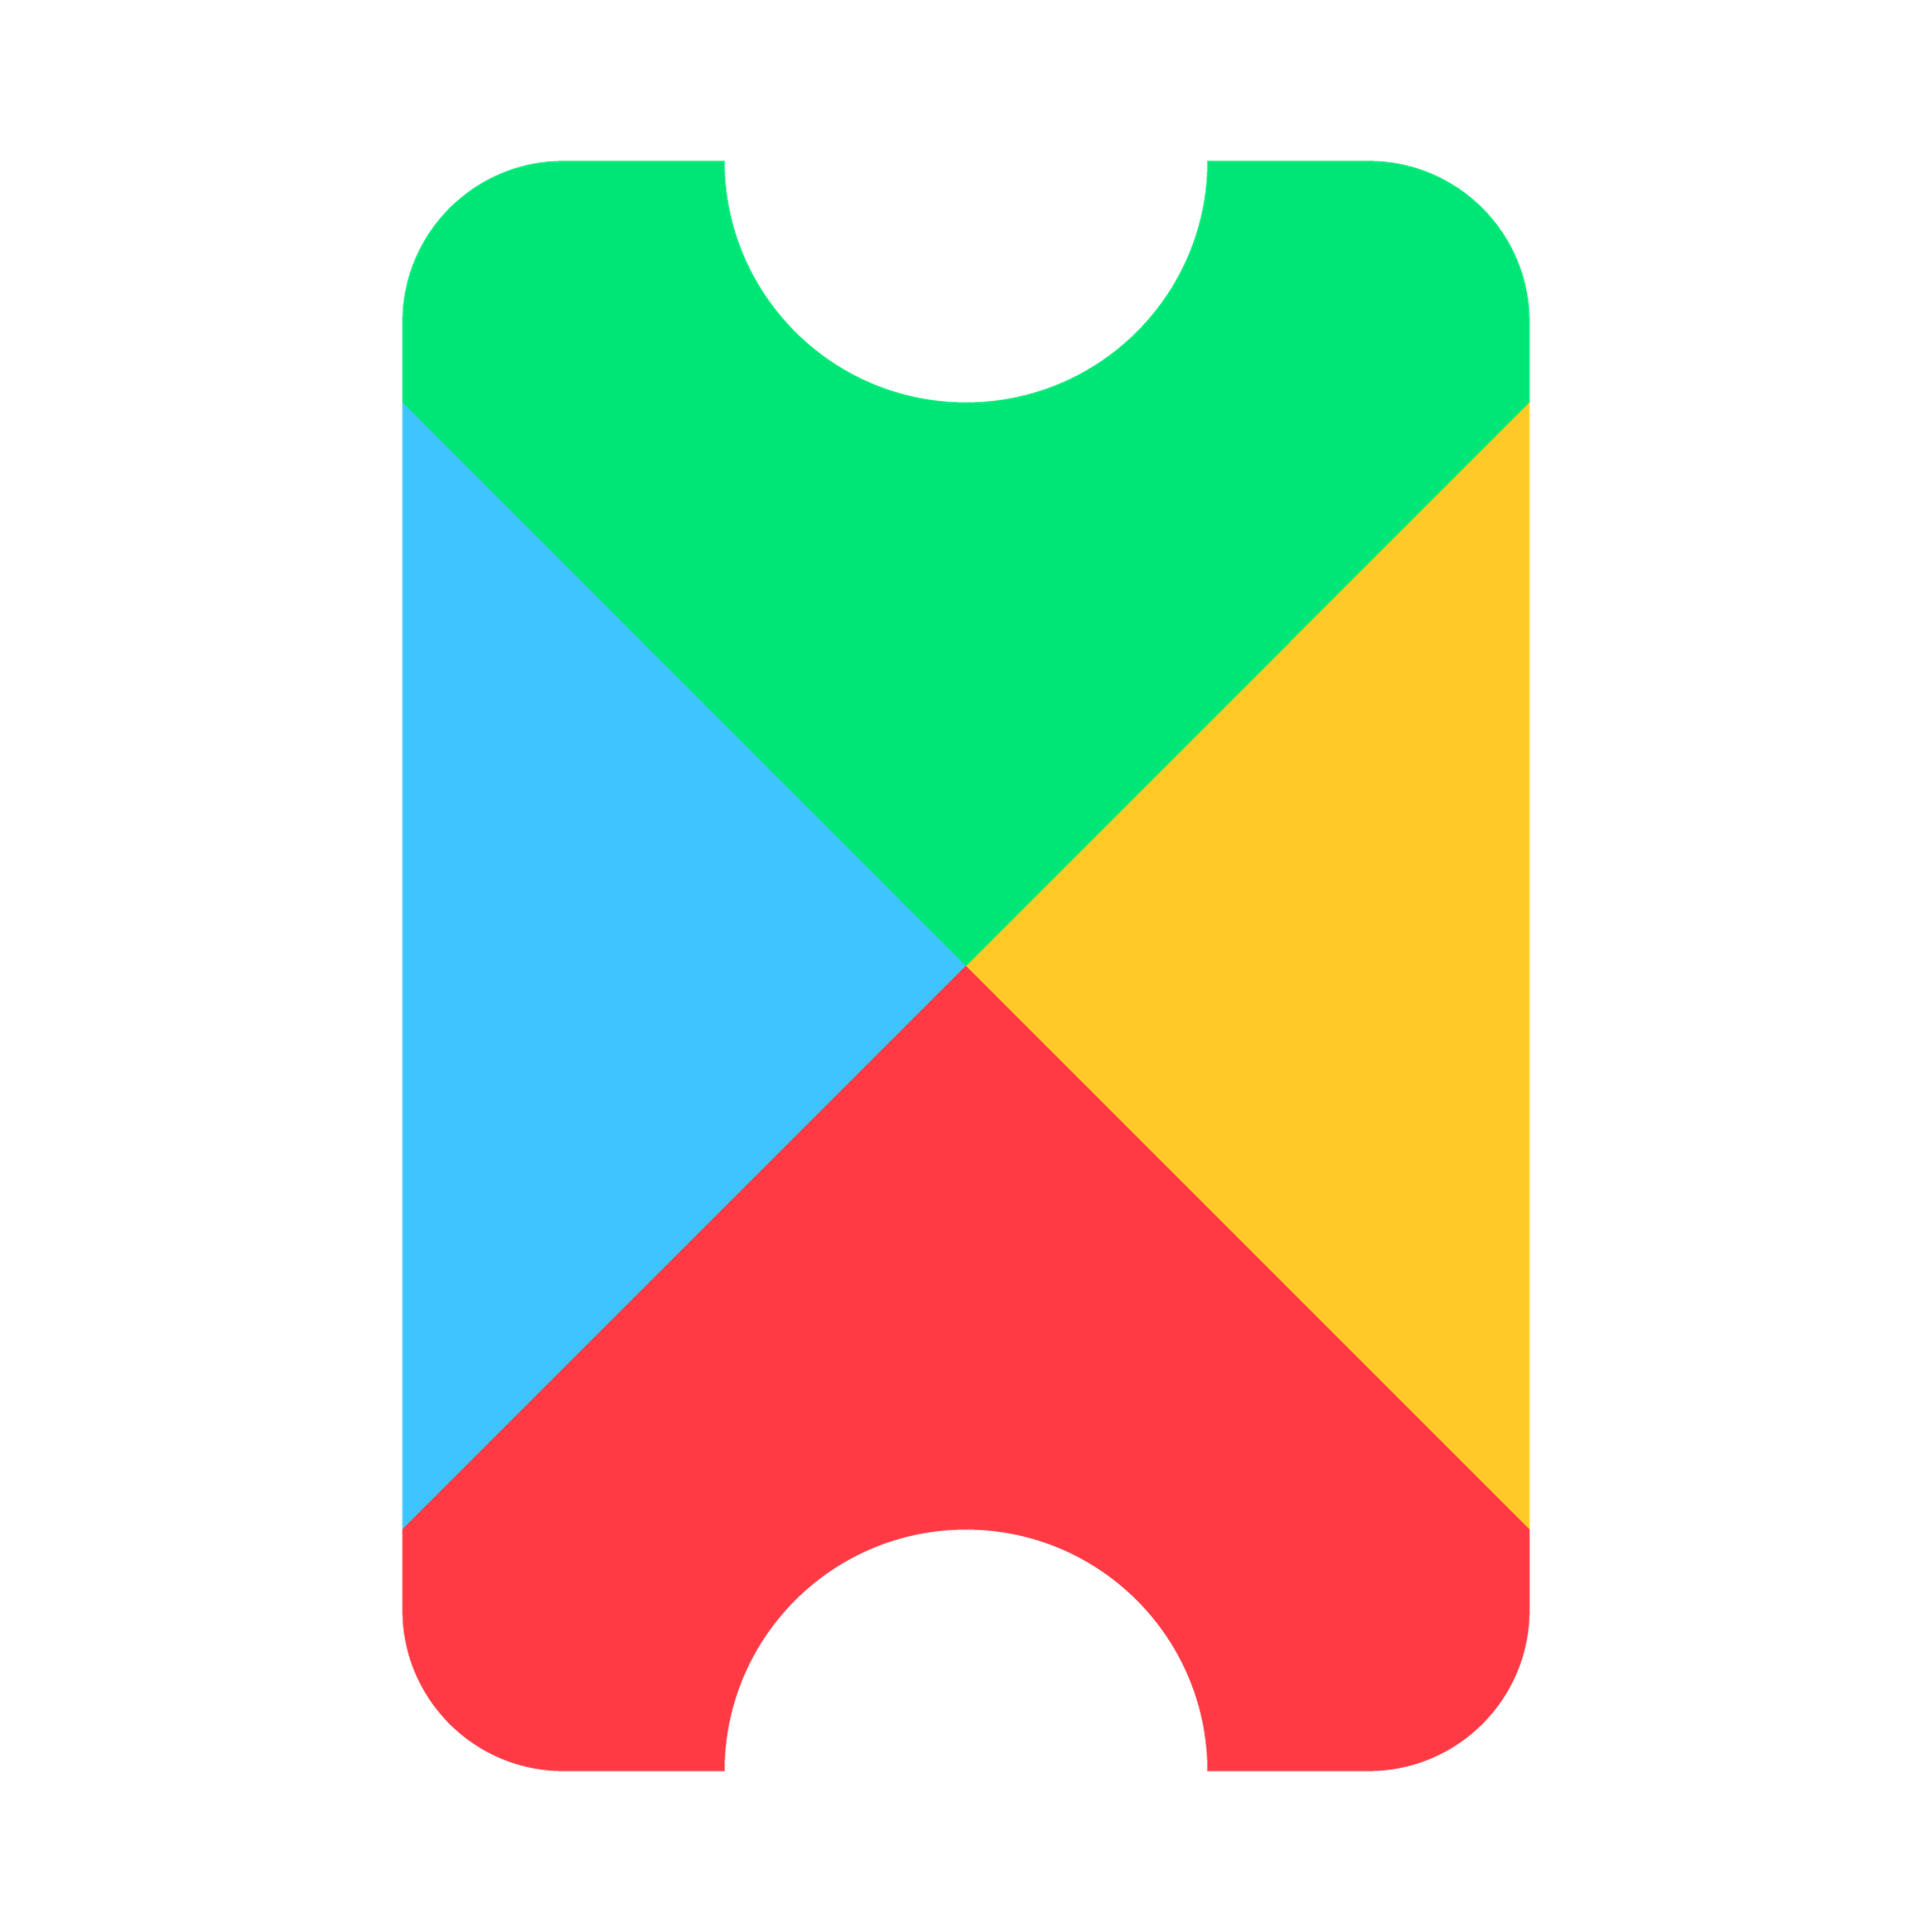 The Google Play Pass “ticket” logo, indicating an app is free with the subscription service.